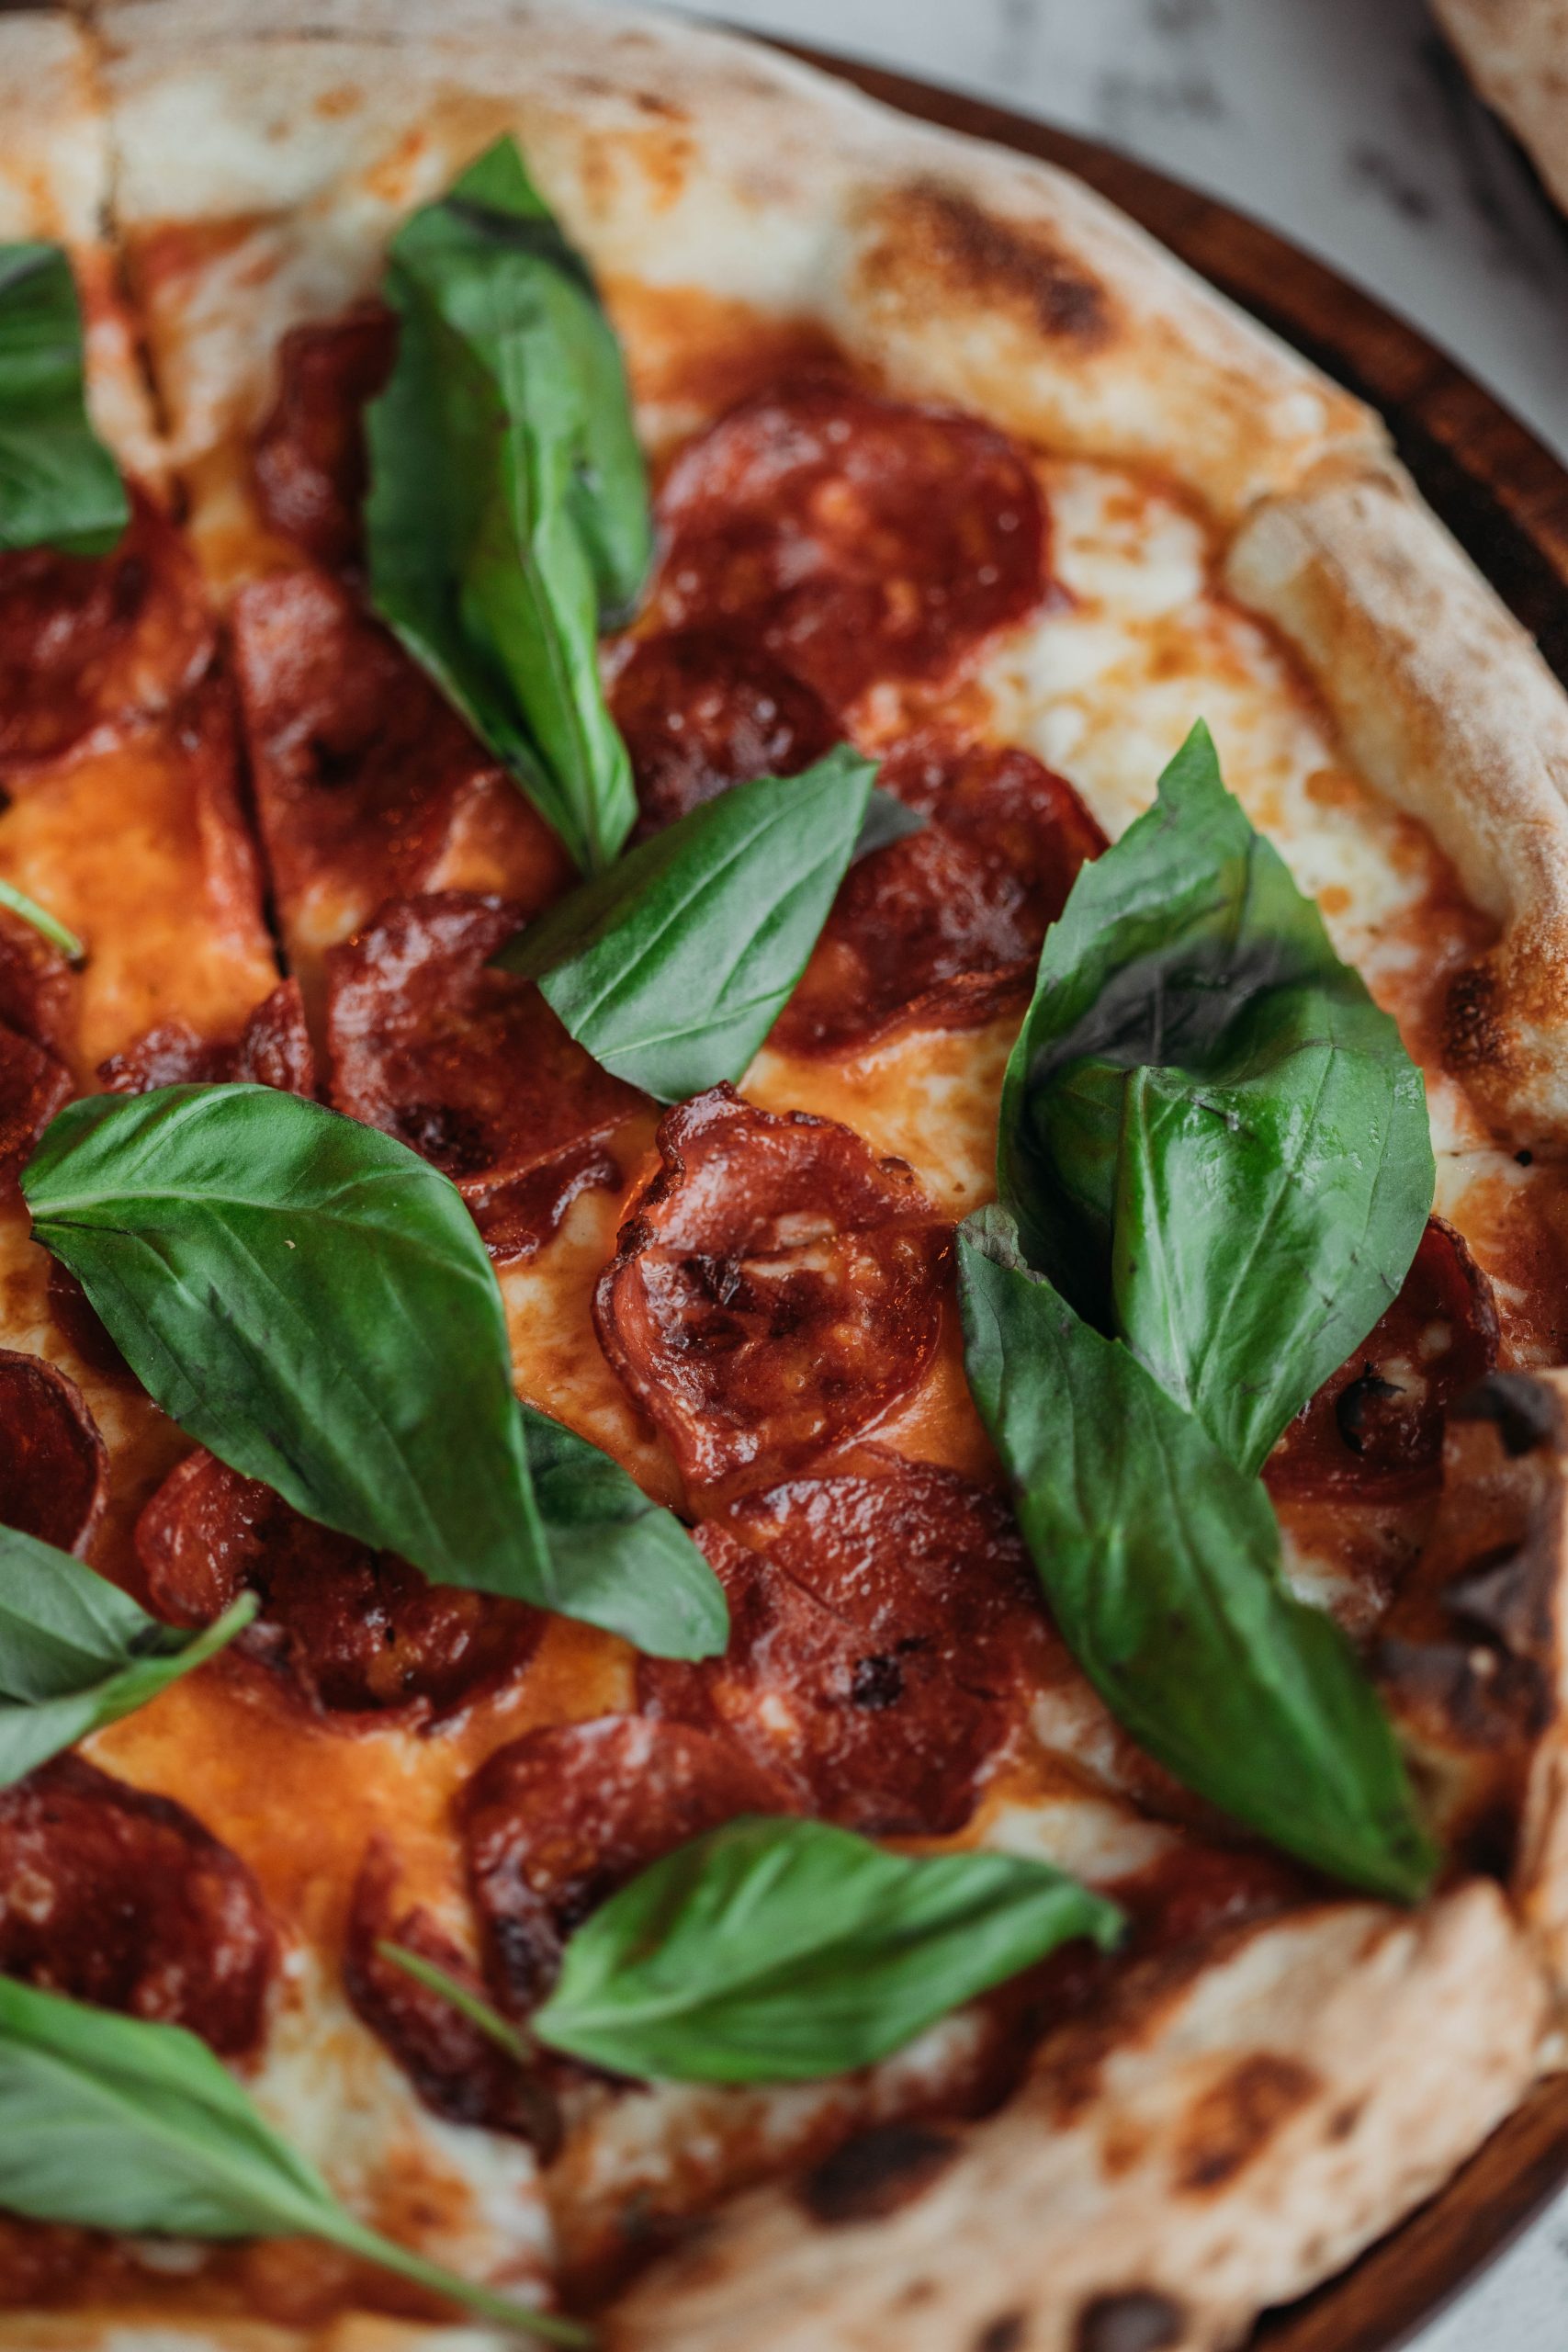 A pizza topped with pepperoni and basil leaves.